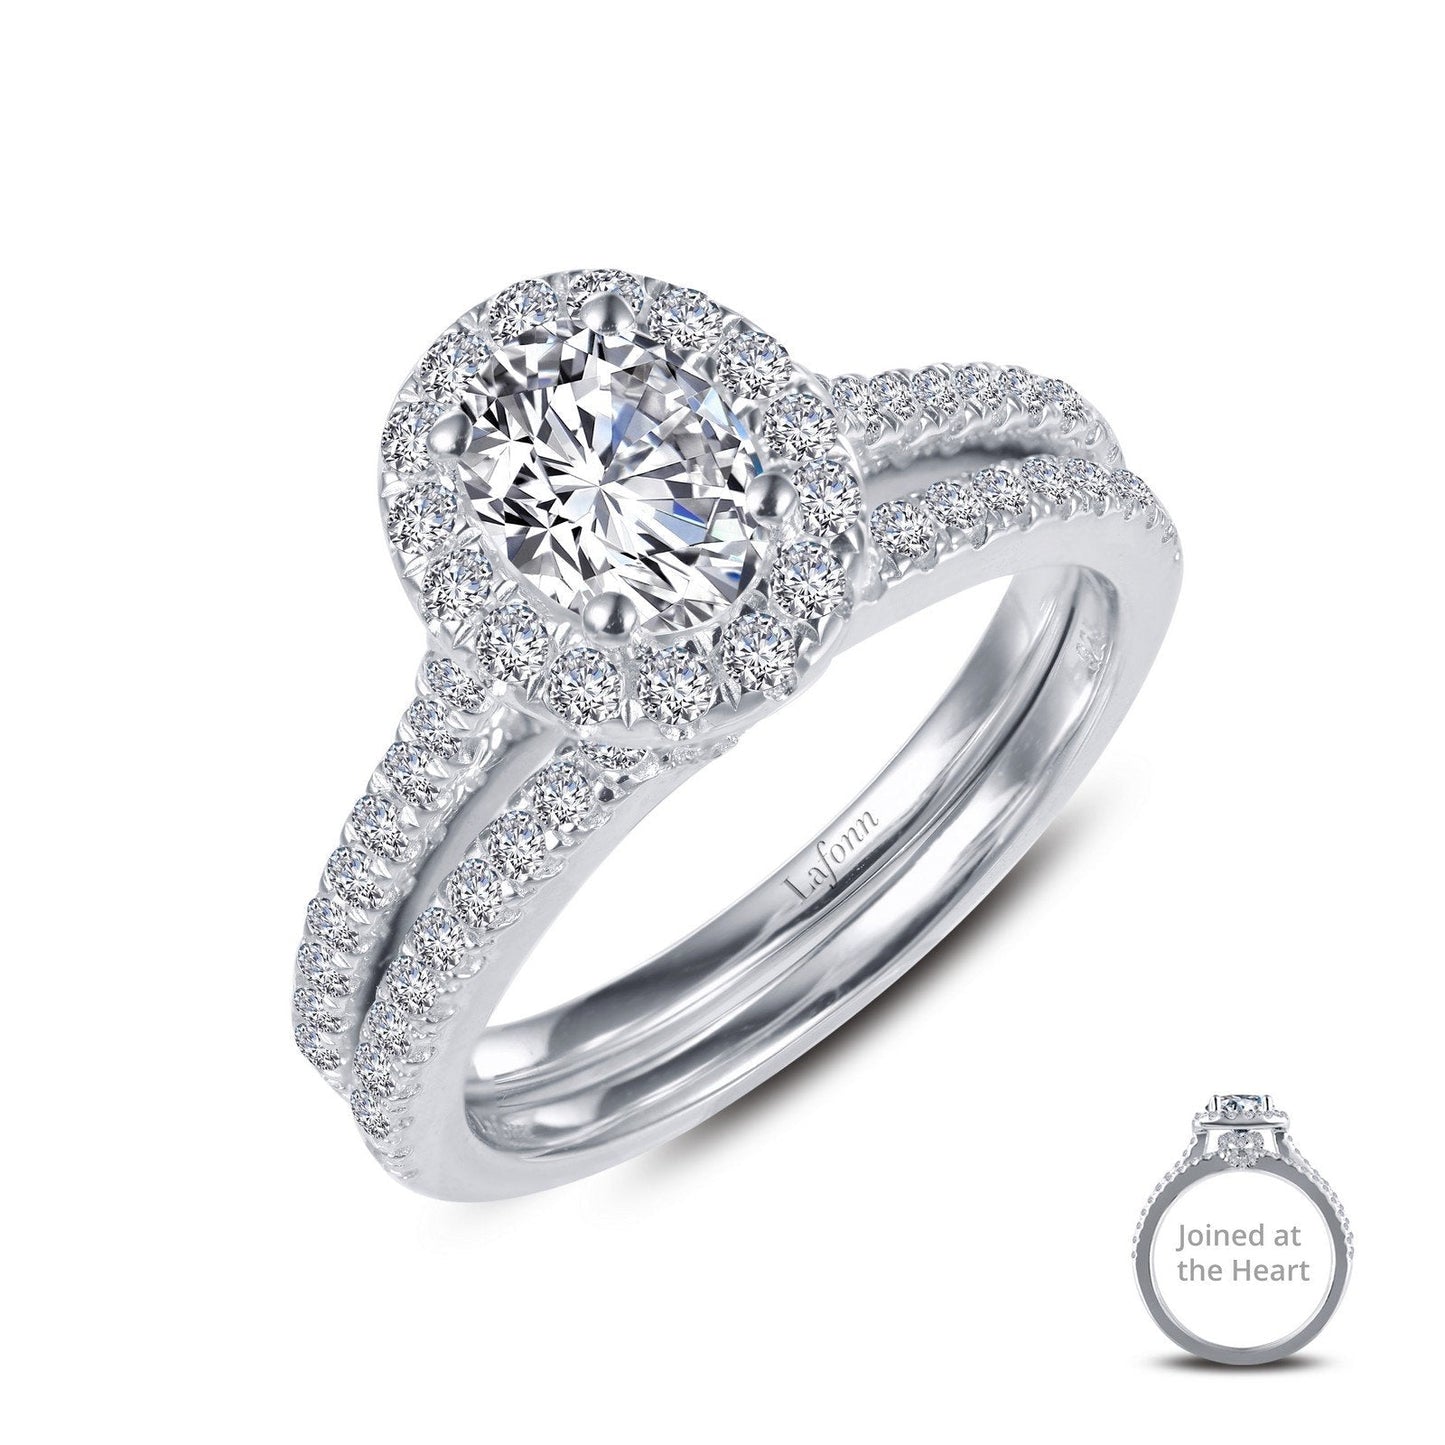 LaFonn Platinum Simulated Diamond Size: 7X5mm Oval, Approx. 0.76 CTW RINGS Joined-At-The-Heart Wedding Set